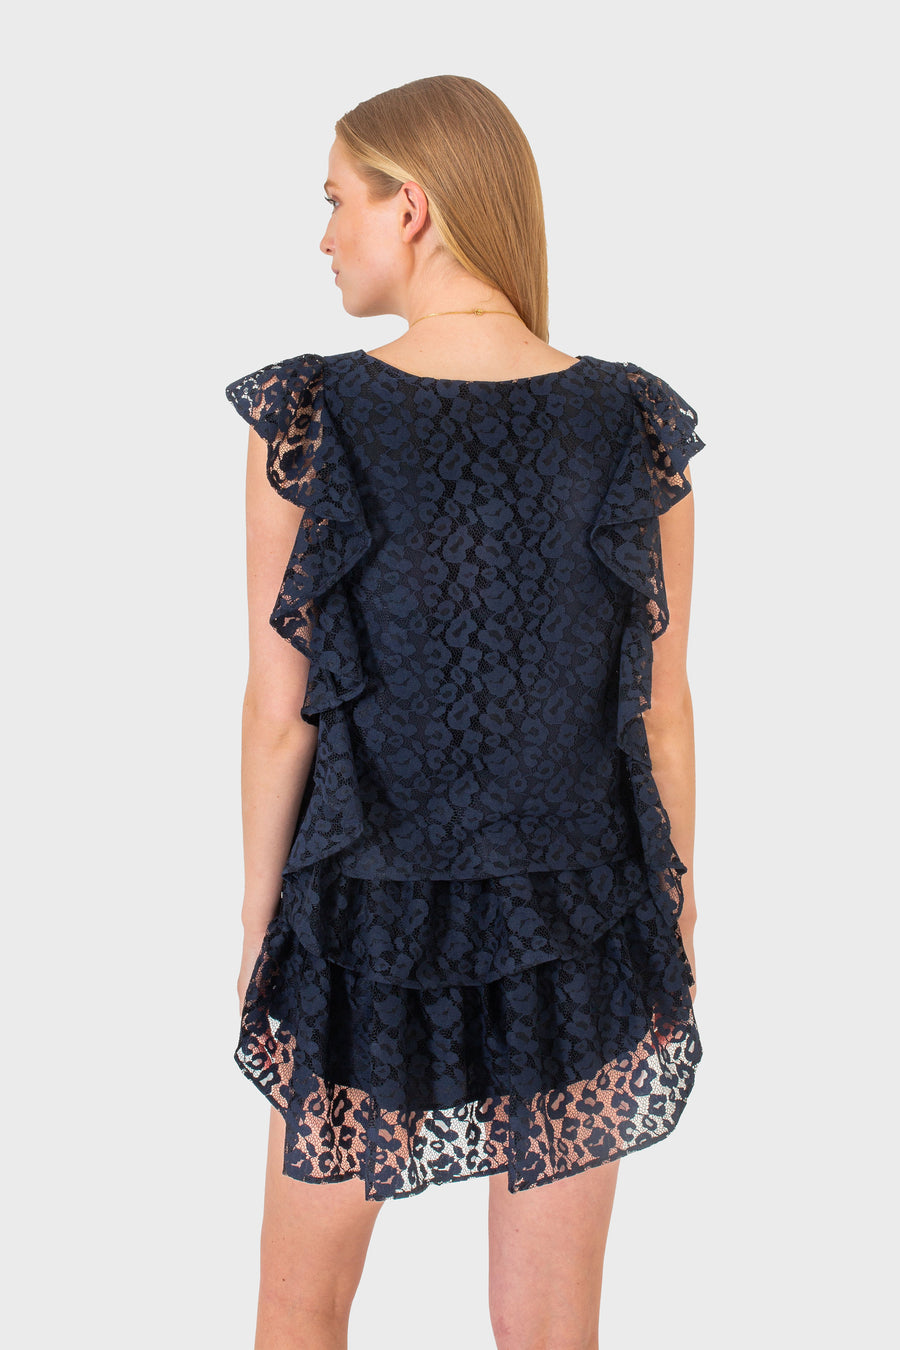 Cara Top Midnight Lace